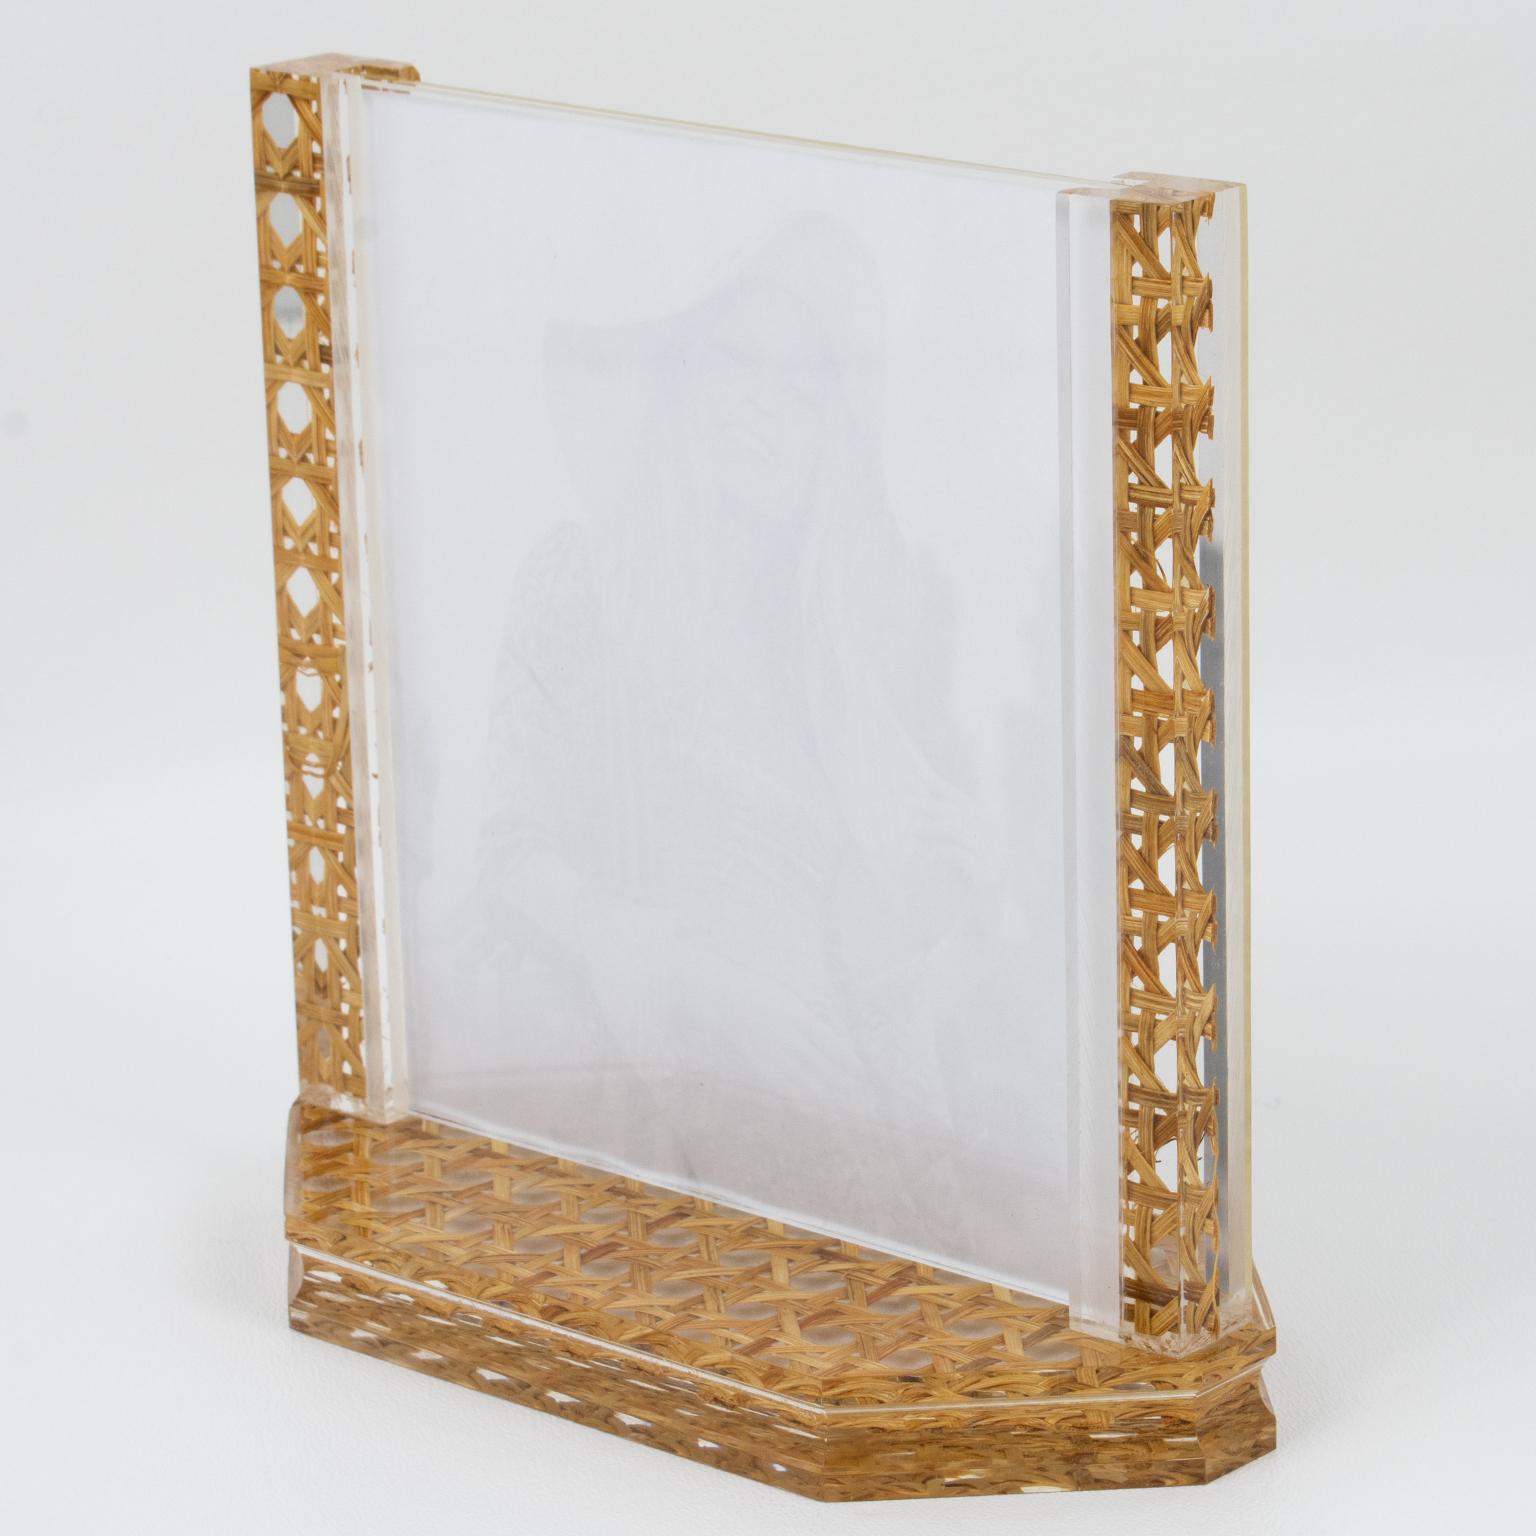 Italian Lucite, Rattan, Wicker Picture Frame, Italy 1970s For Sale